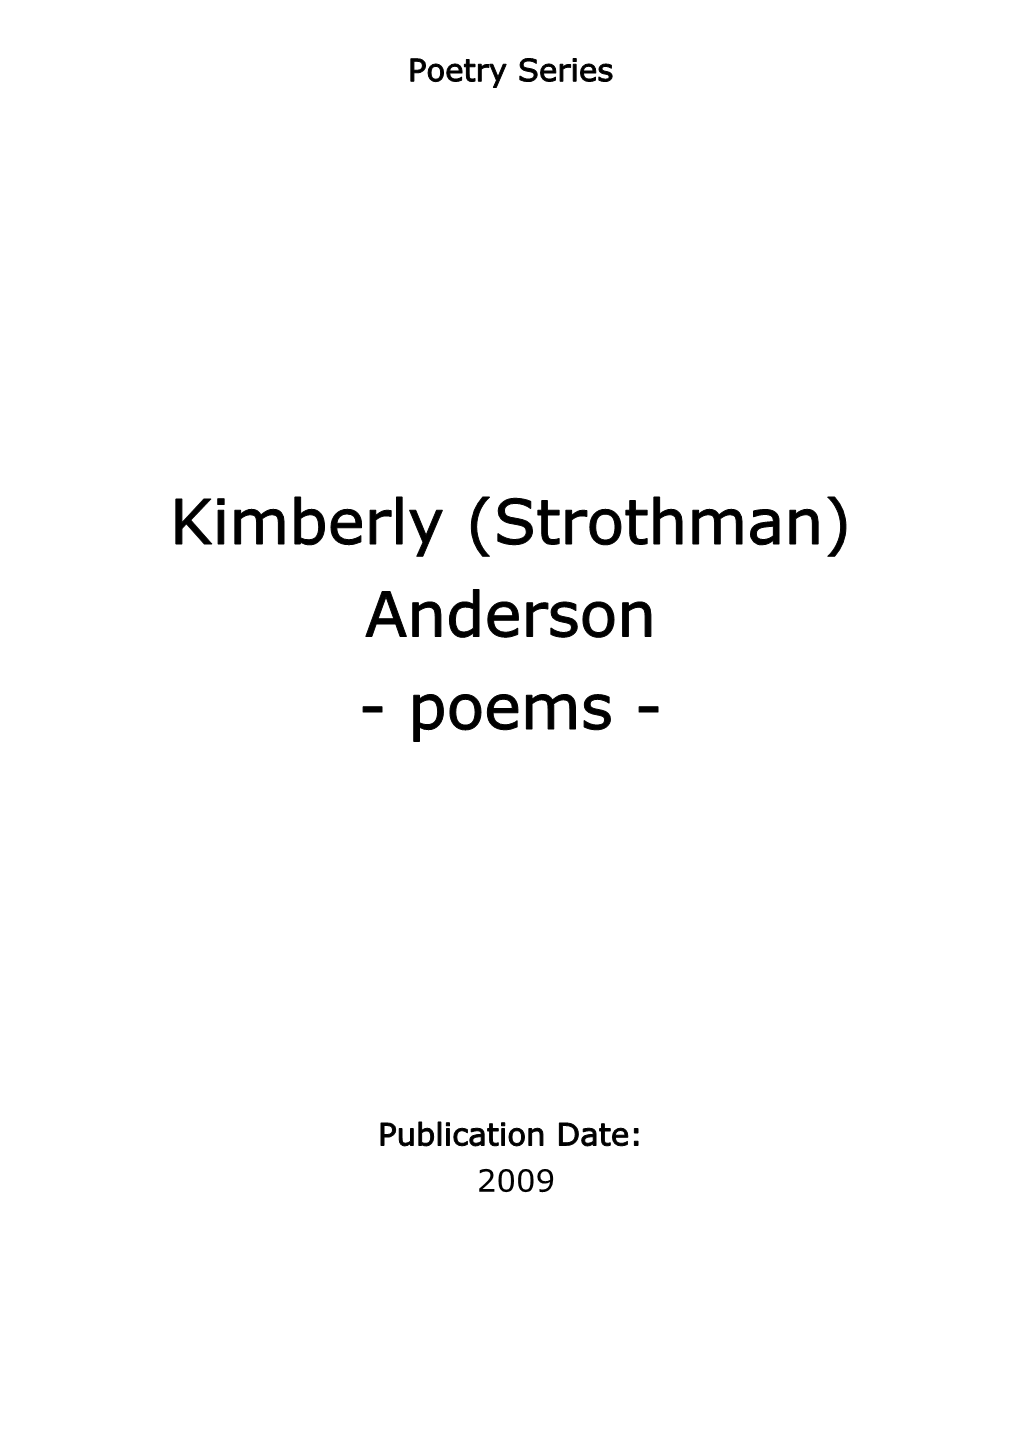 Kimberly (Strothman) Anderson - Poems